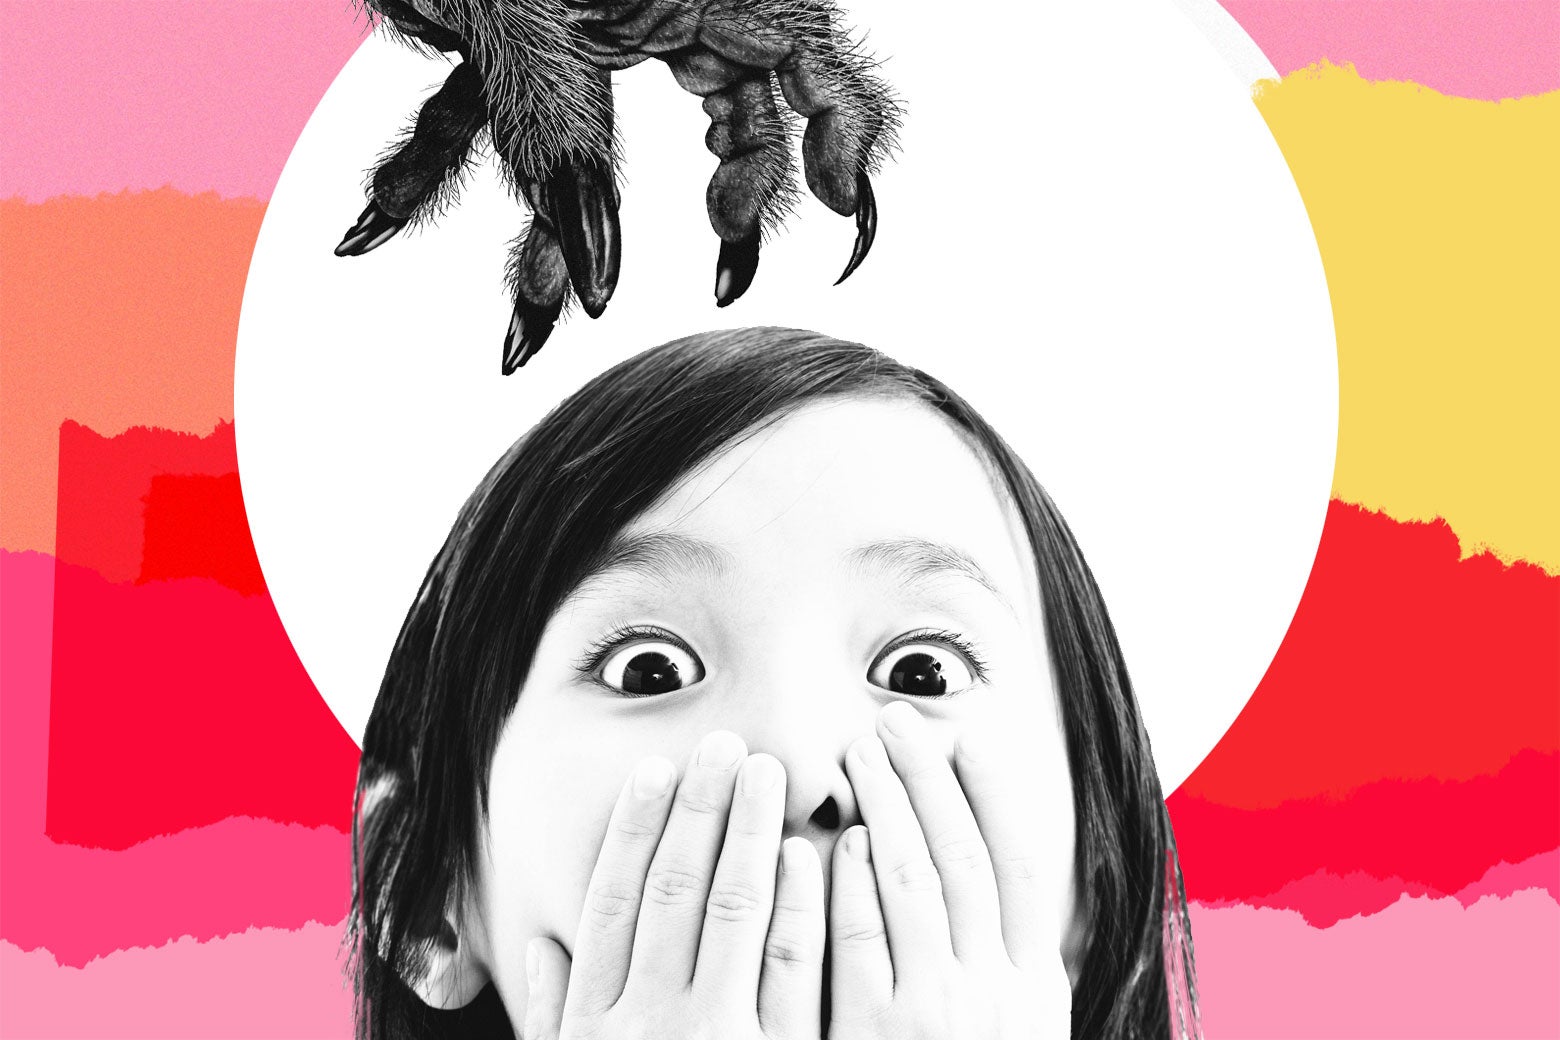 Photo illustration: A young girl covers her mouth with a scared expression in her eyes as a clawed hand reaches toward her hair.